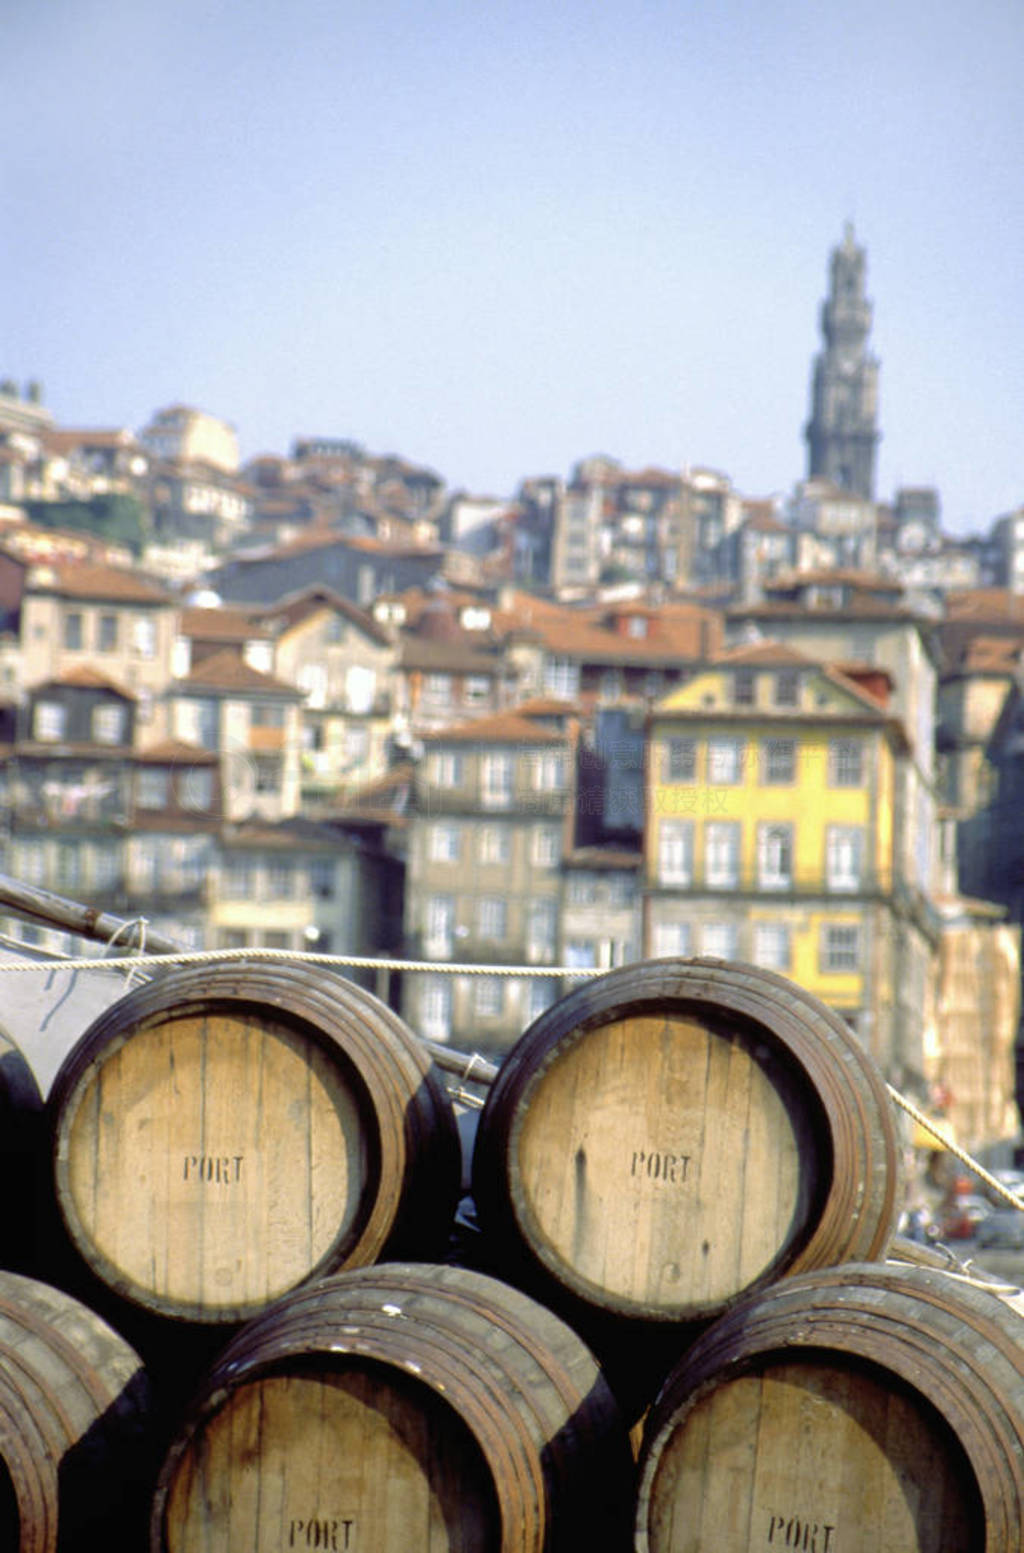 Port wine barrels on a boat on River Douro